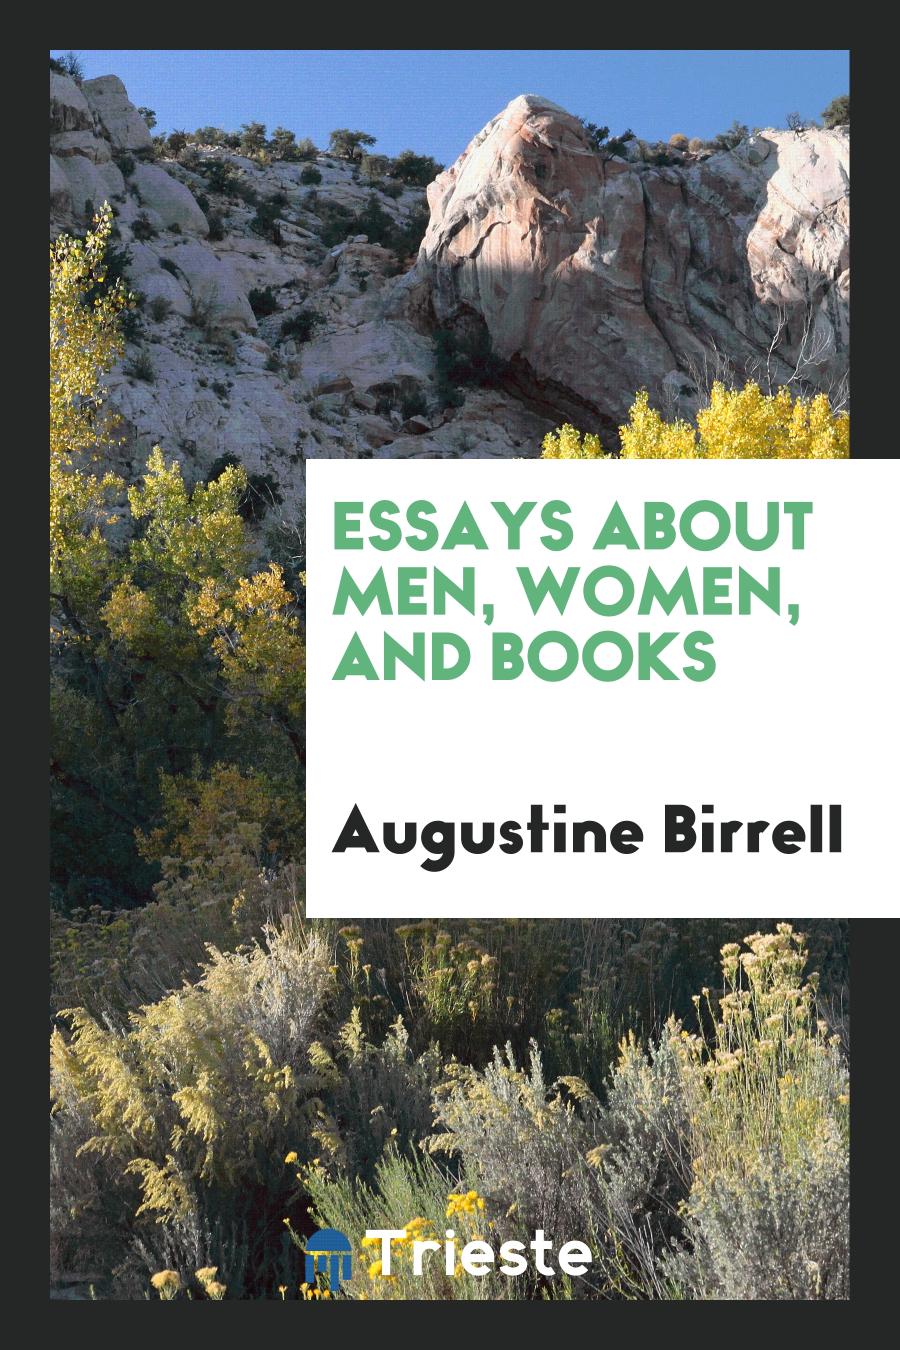 Essays about Men, Women, and Books